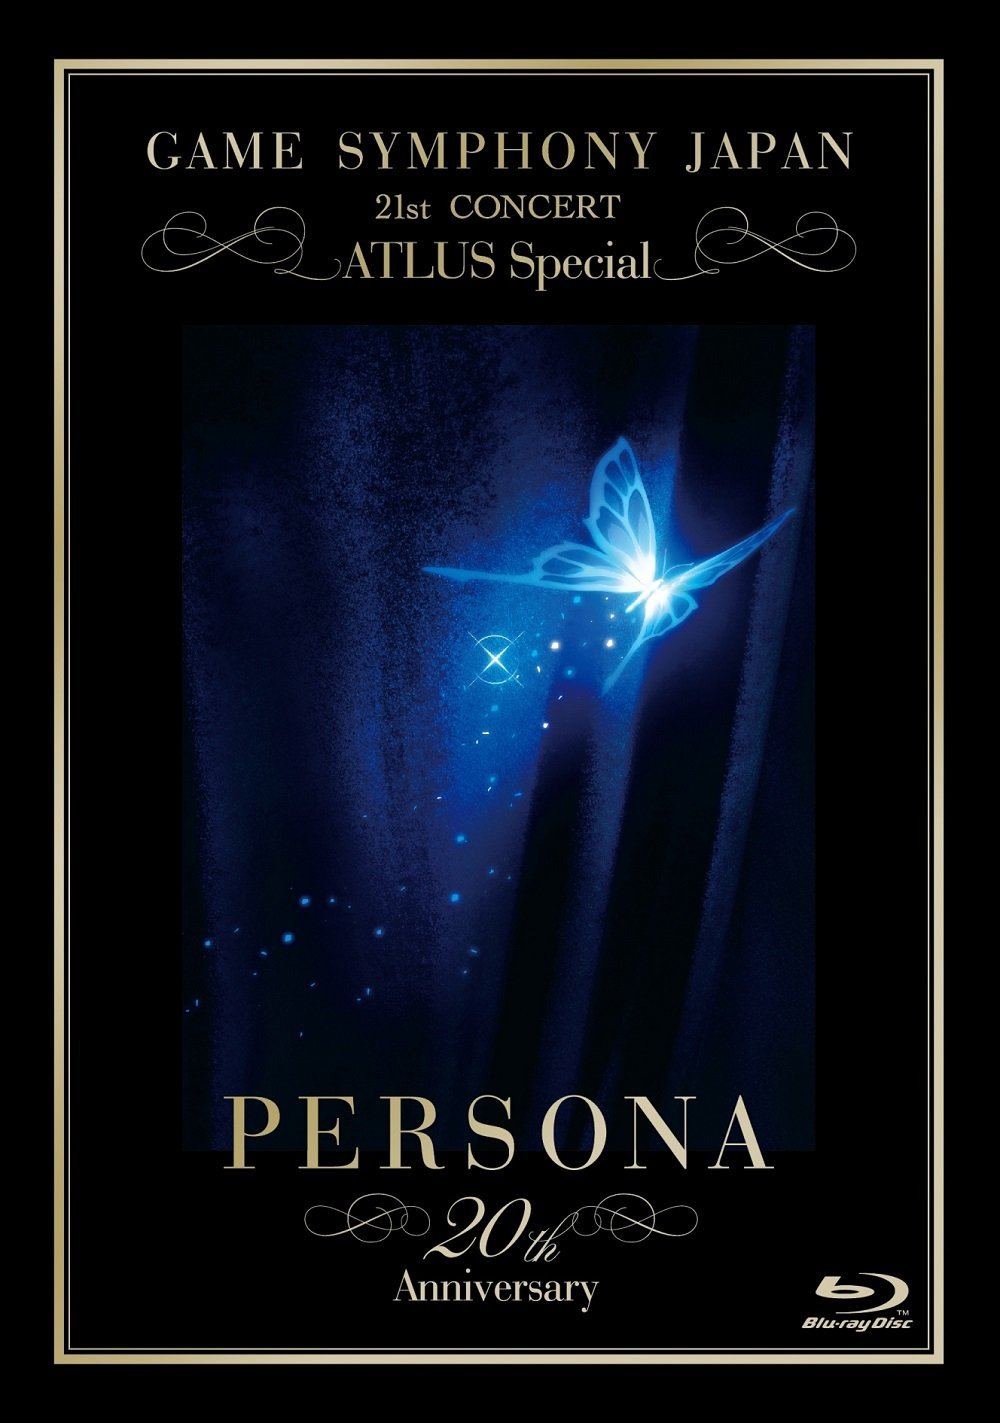 Game Symphony Japan 21St Concert Atlus Special Persona 20th Anniversary